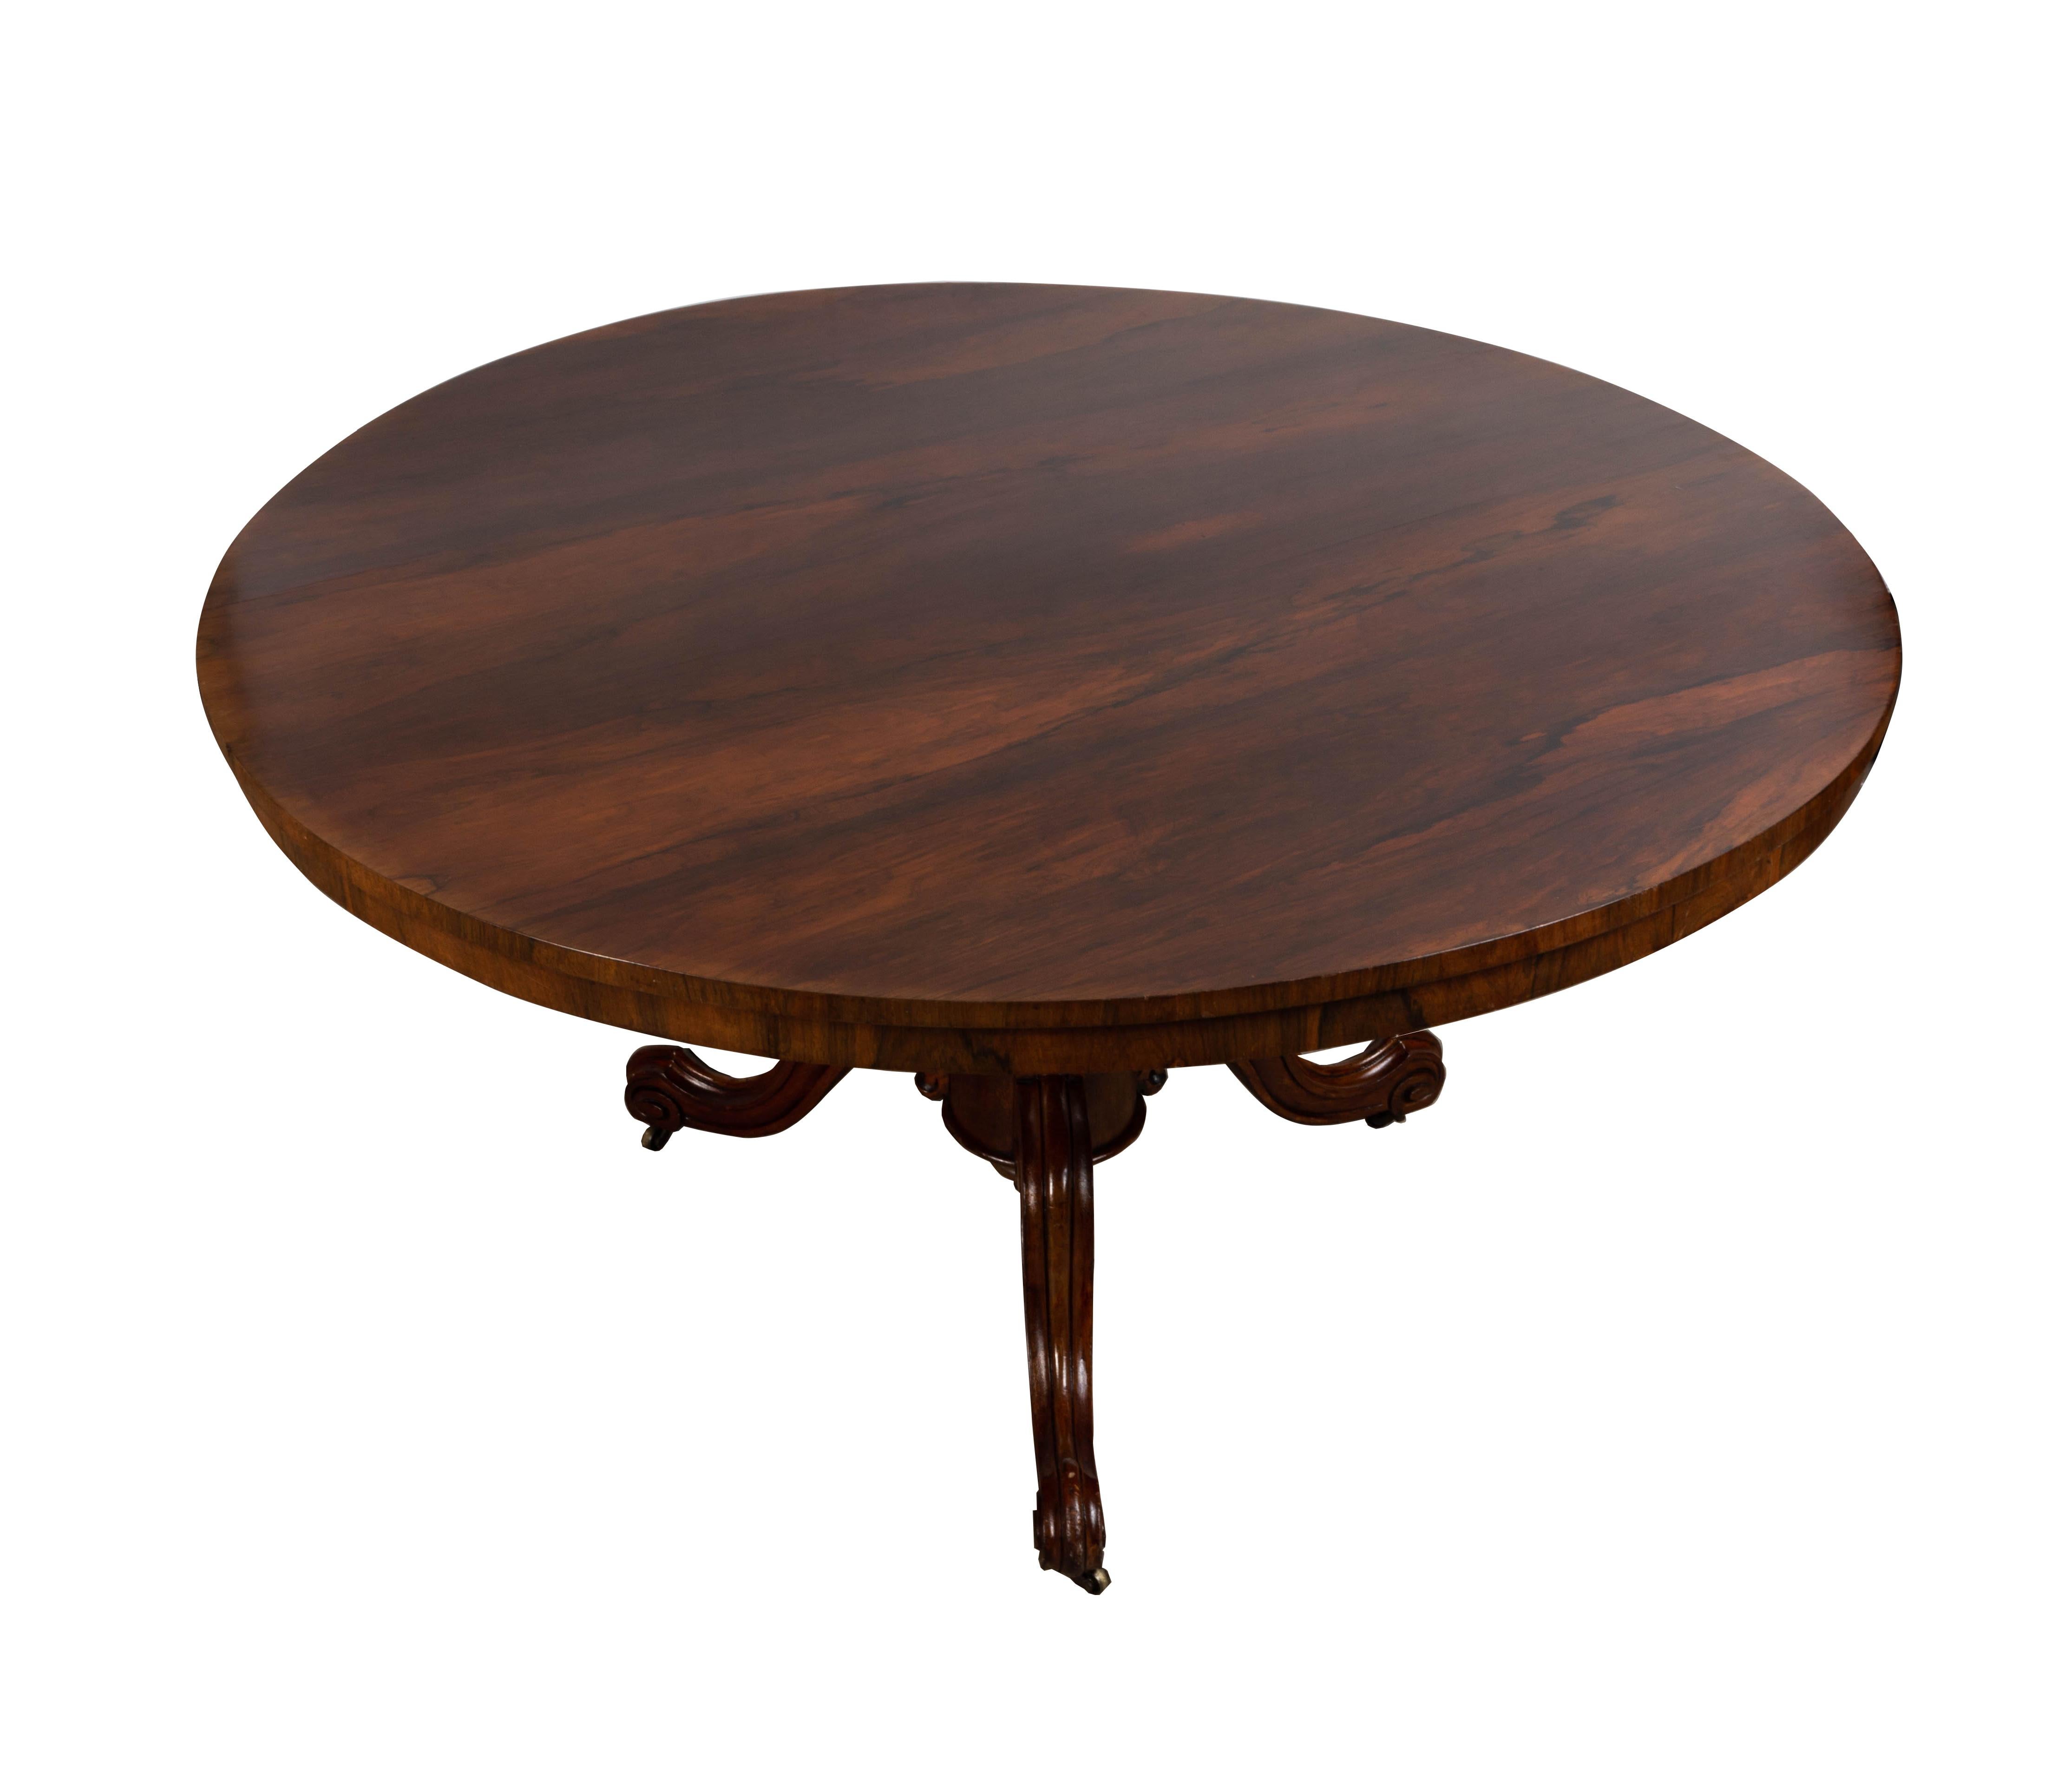 English 19th Century Regency Rosewood Tilt Top Centre Table, C.1830 For Sale 2